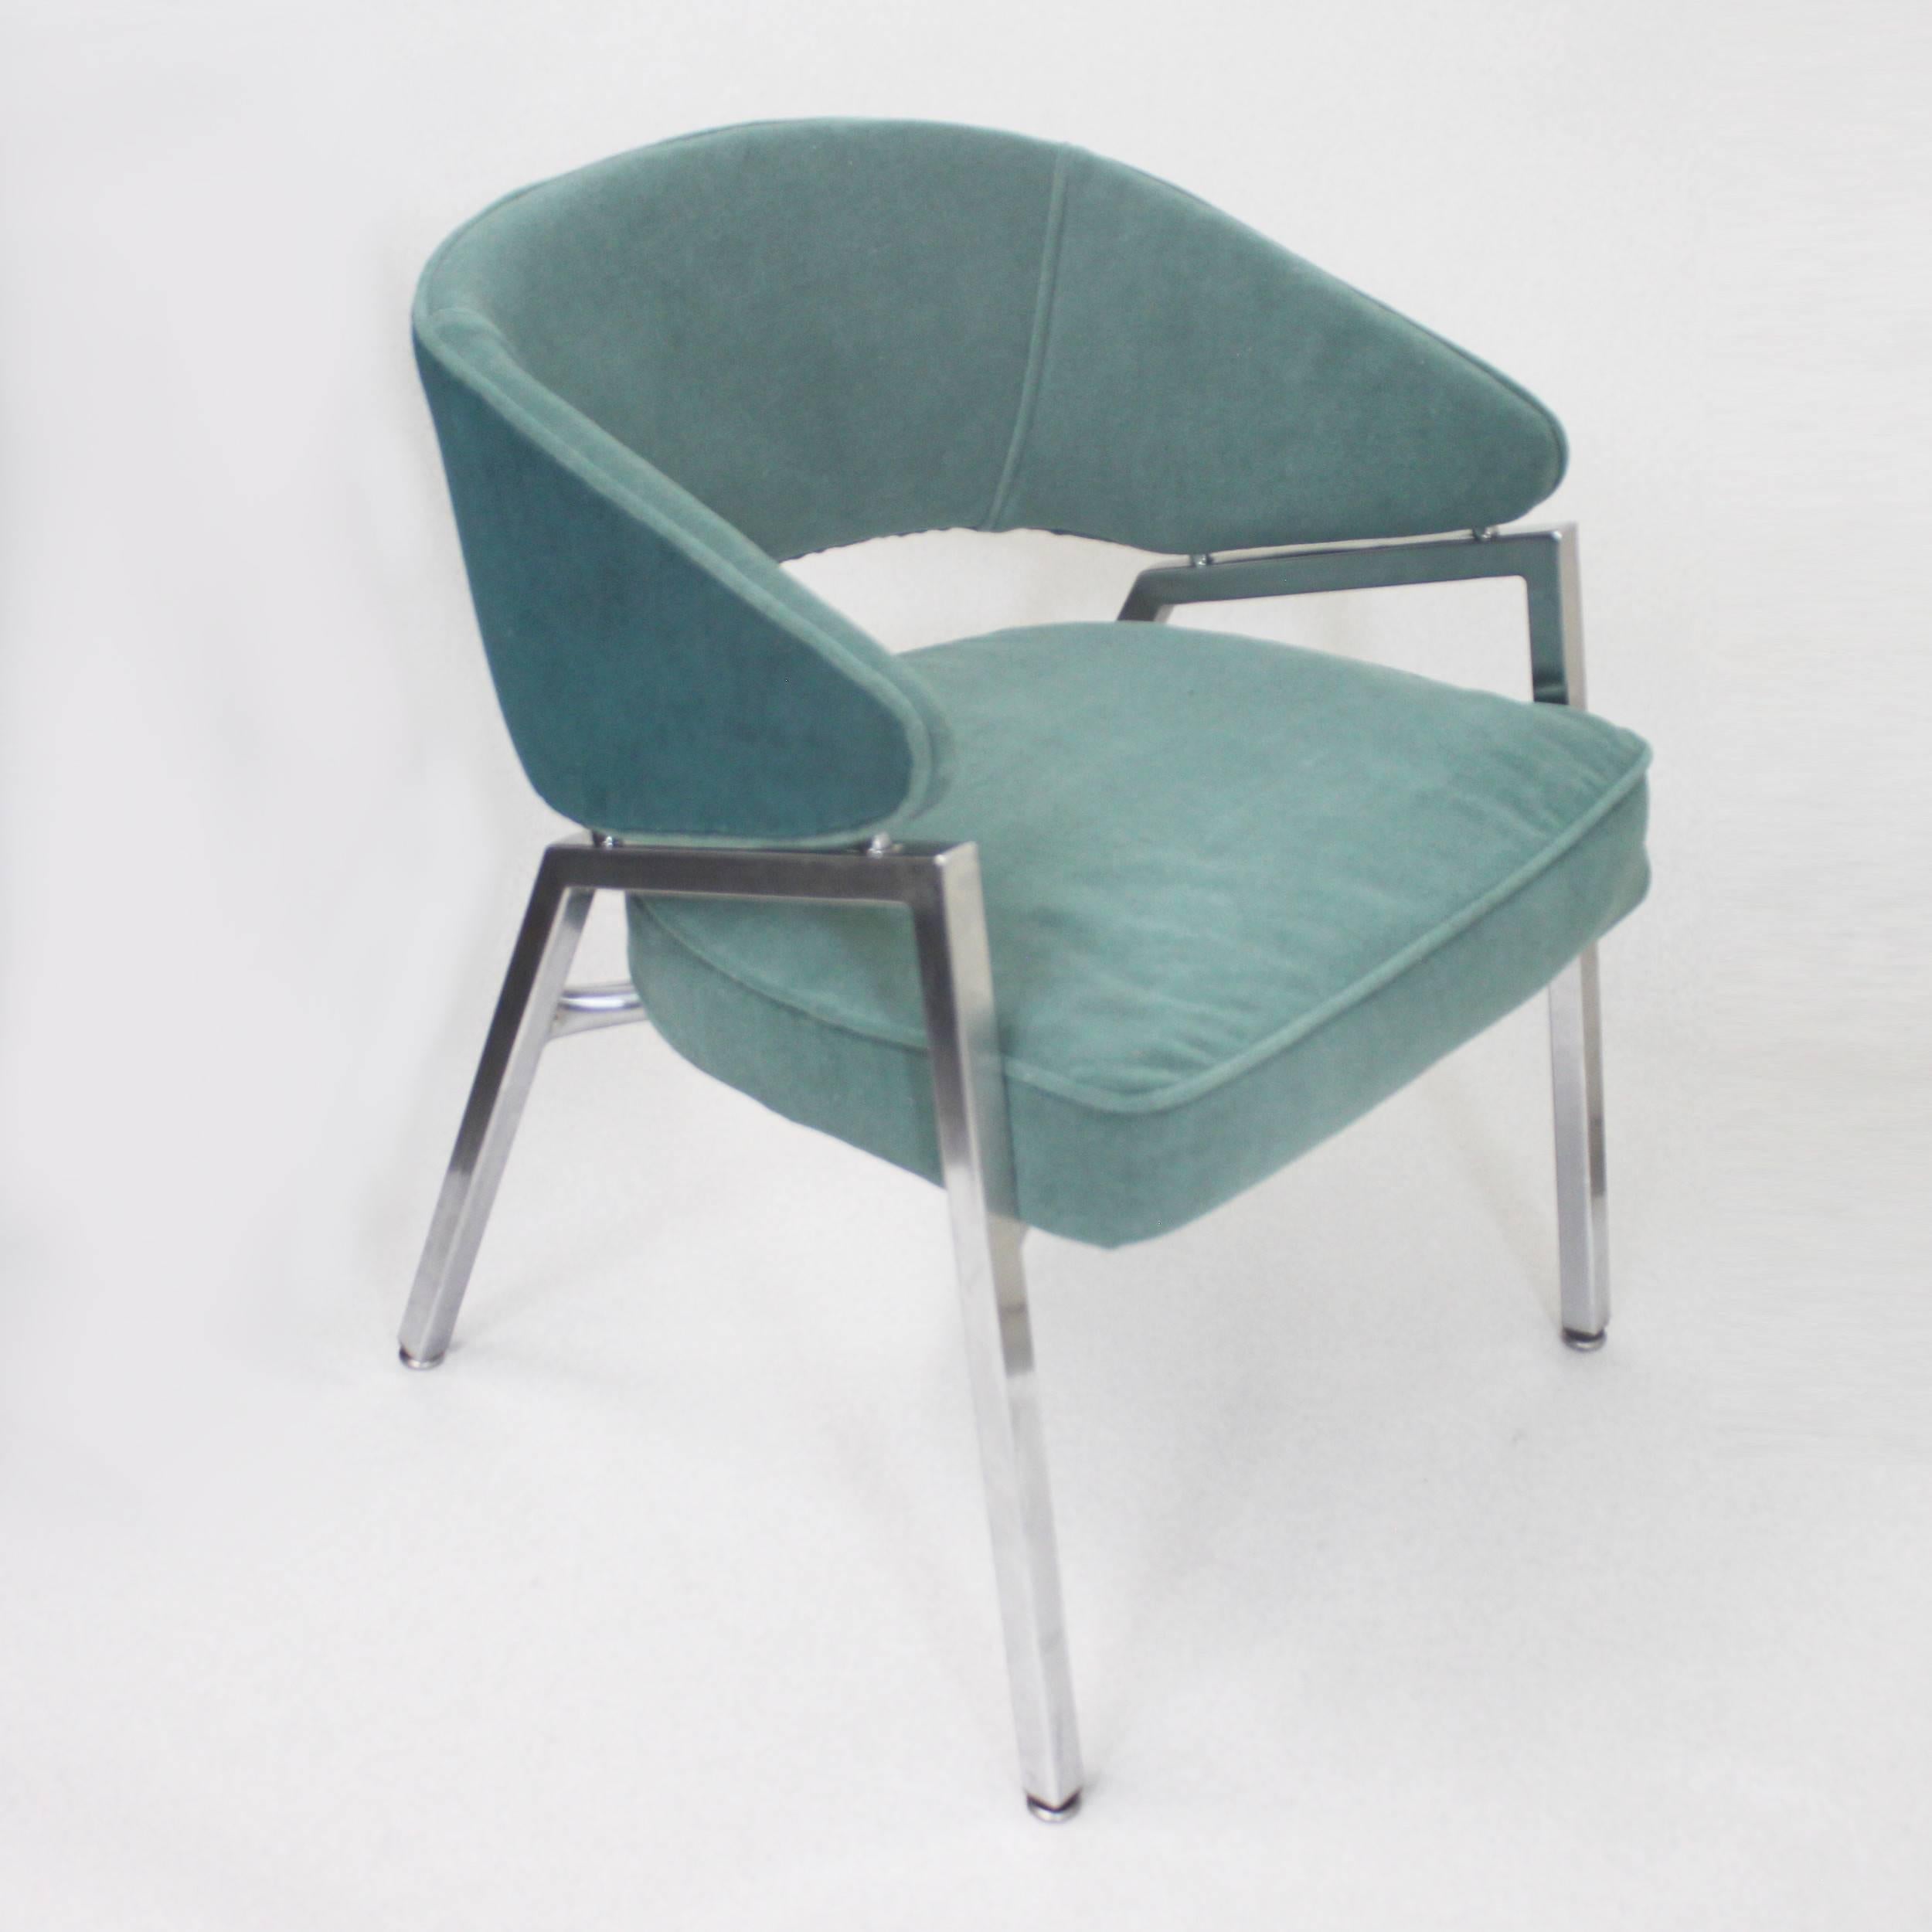 Late 20th Century Rare Pair of 1970s Mid-Century Modern Teal Green and Chrome Side Armchairs